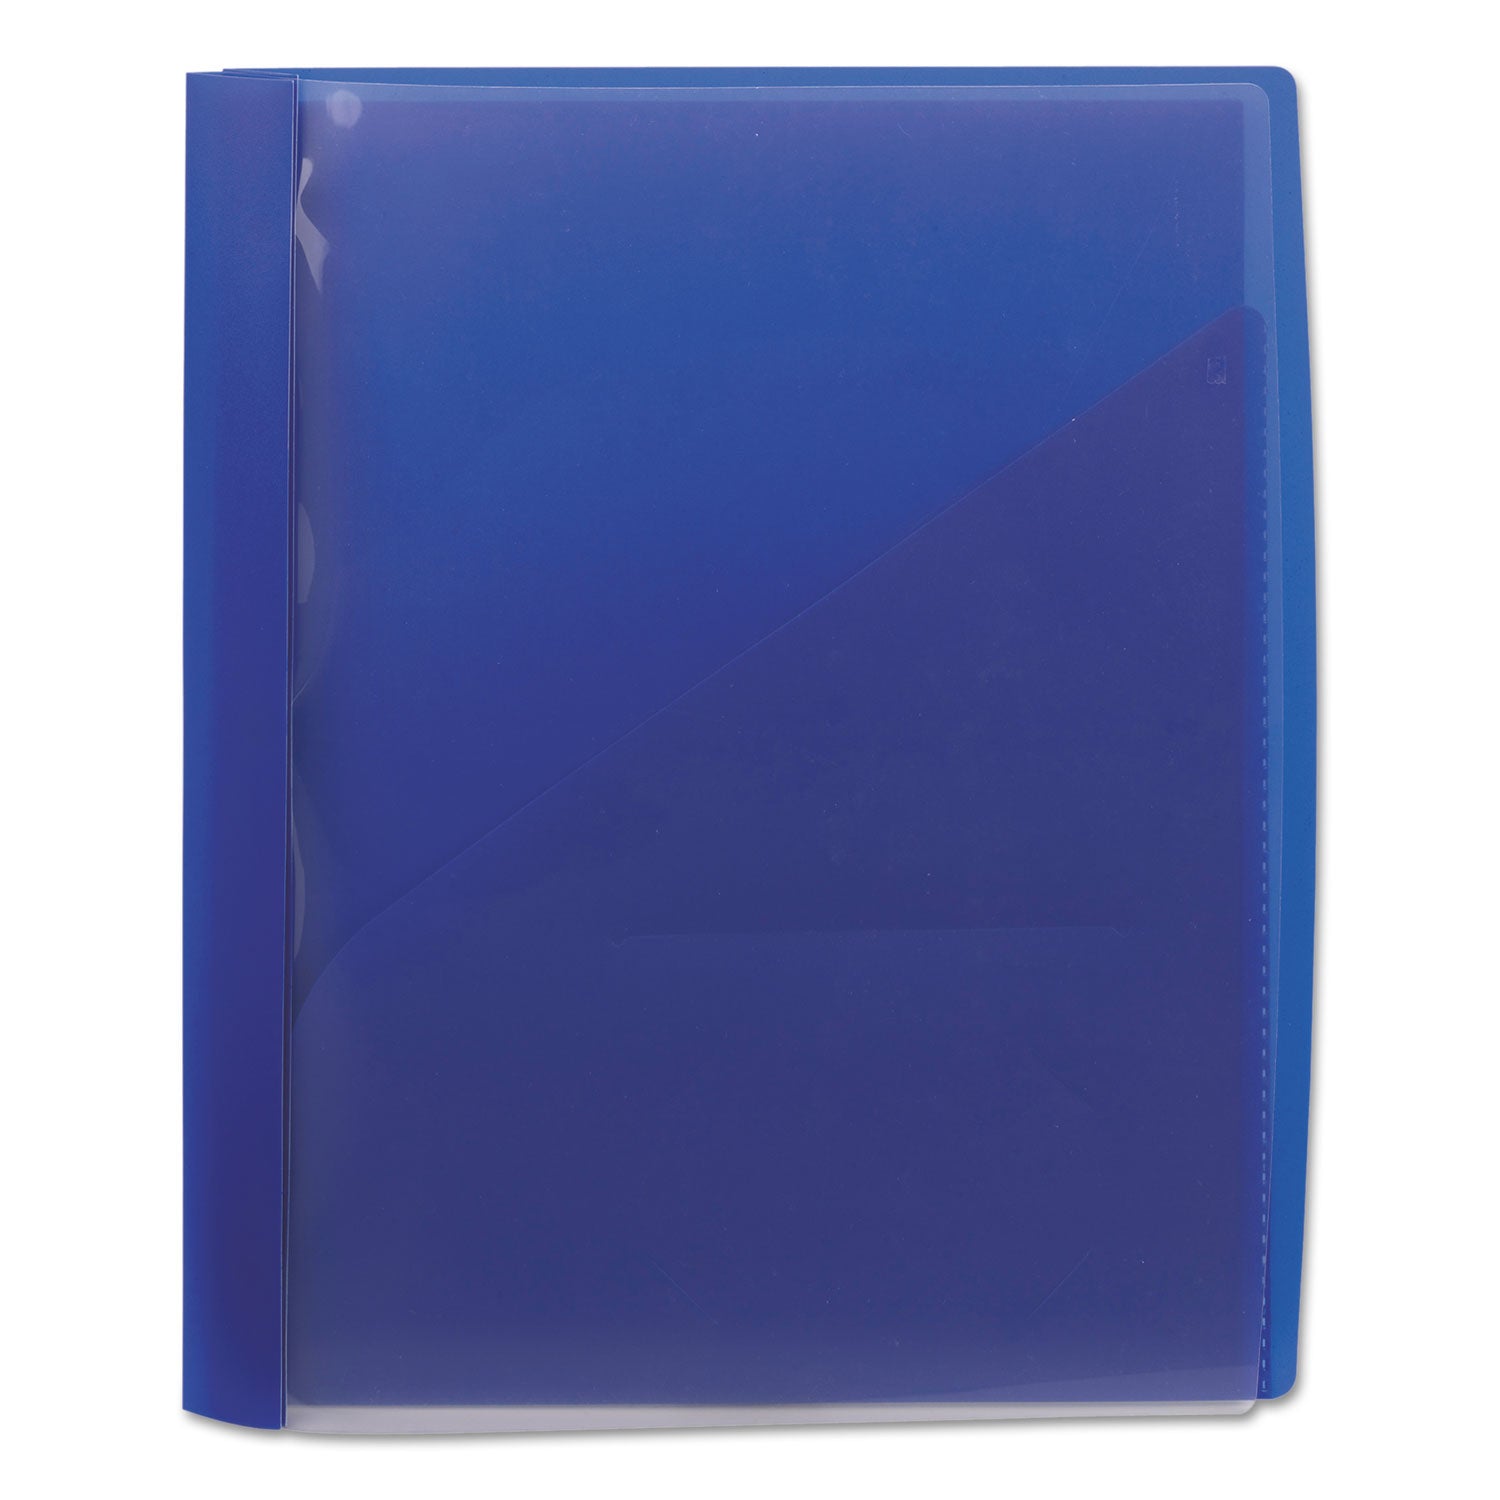 Clear Front Poly Report Cover, Double-Prong Fastener, 0.5" Capacity, 8.5 x 11, Clear/Blue, 5/Pack - 